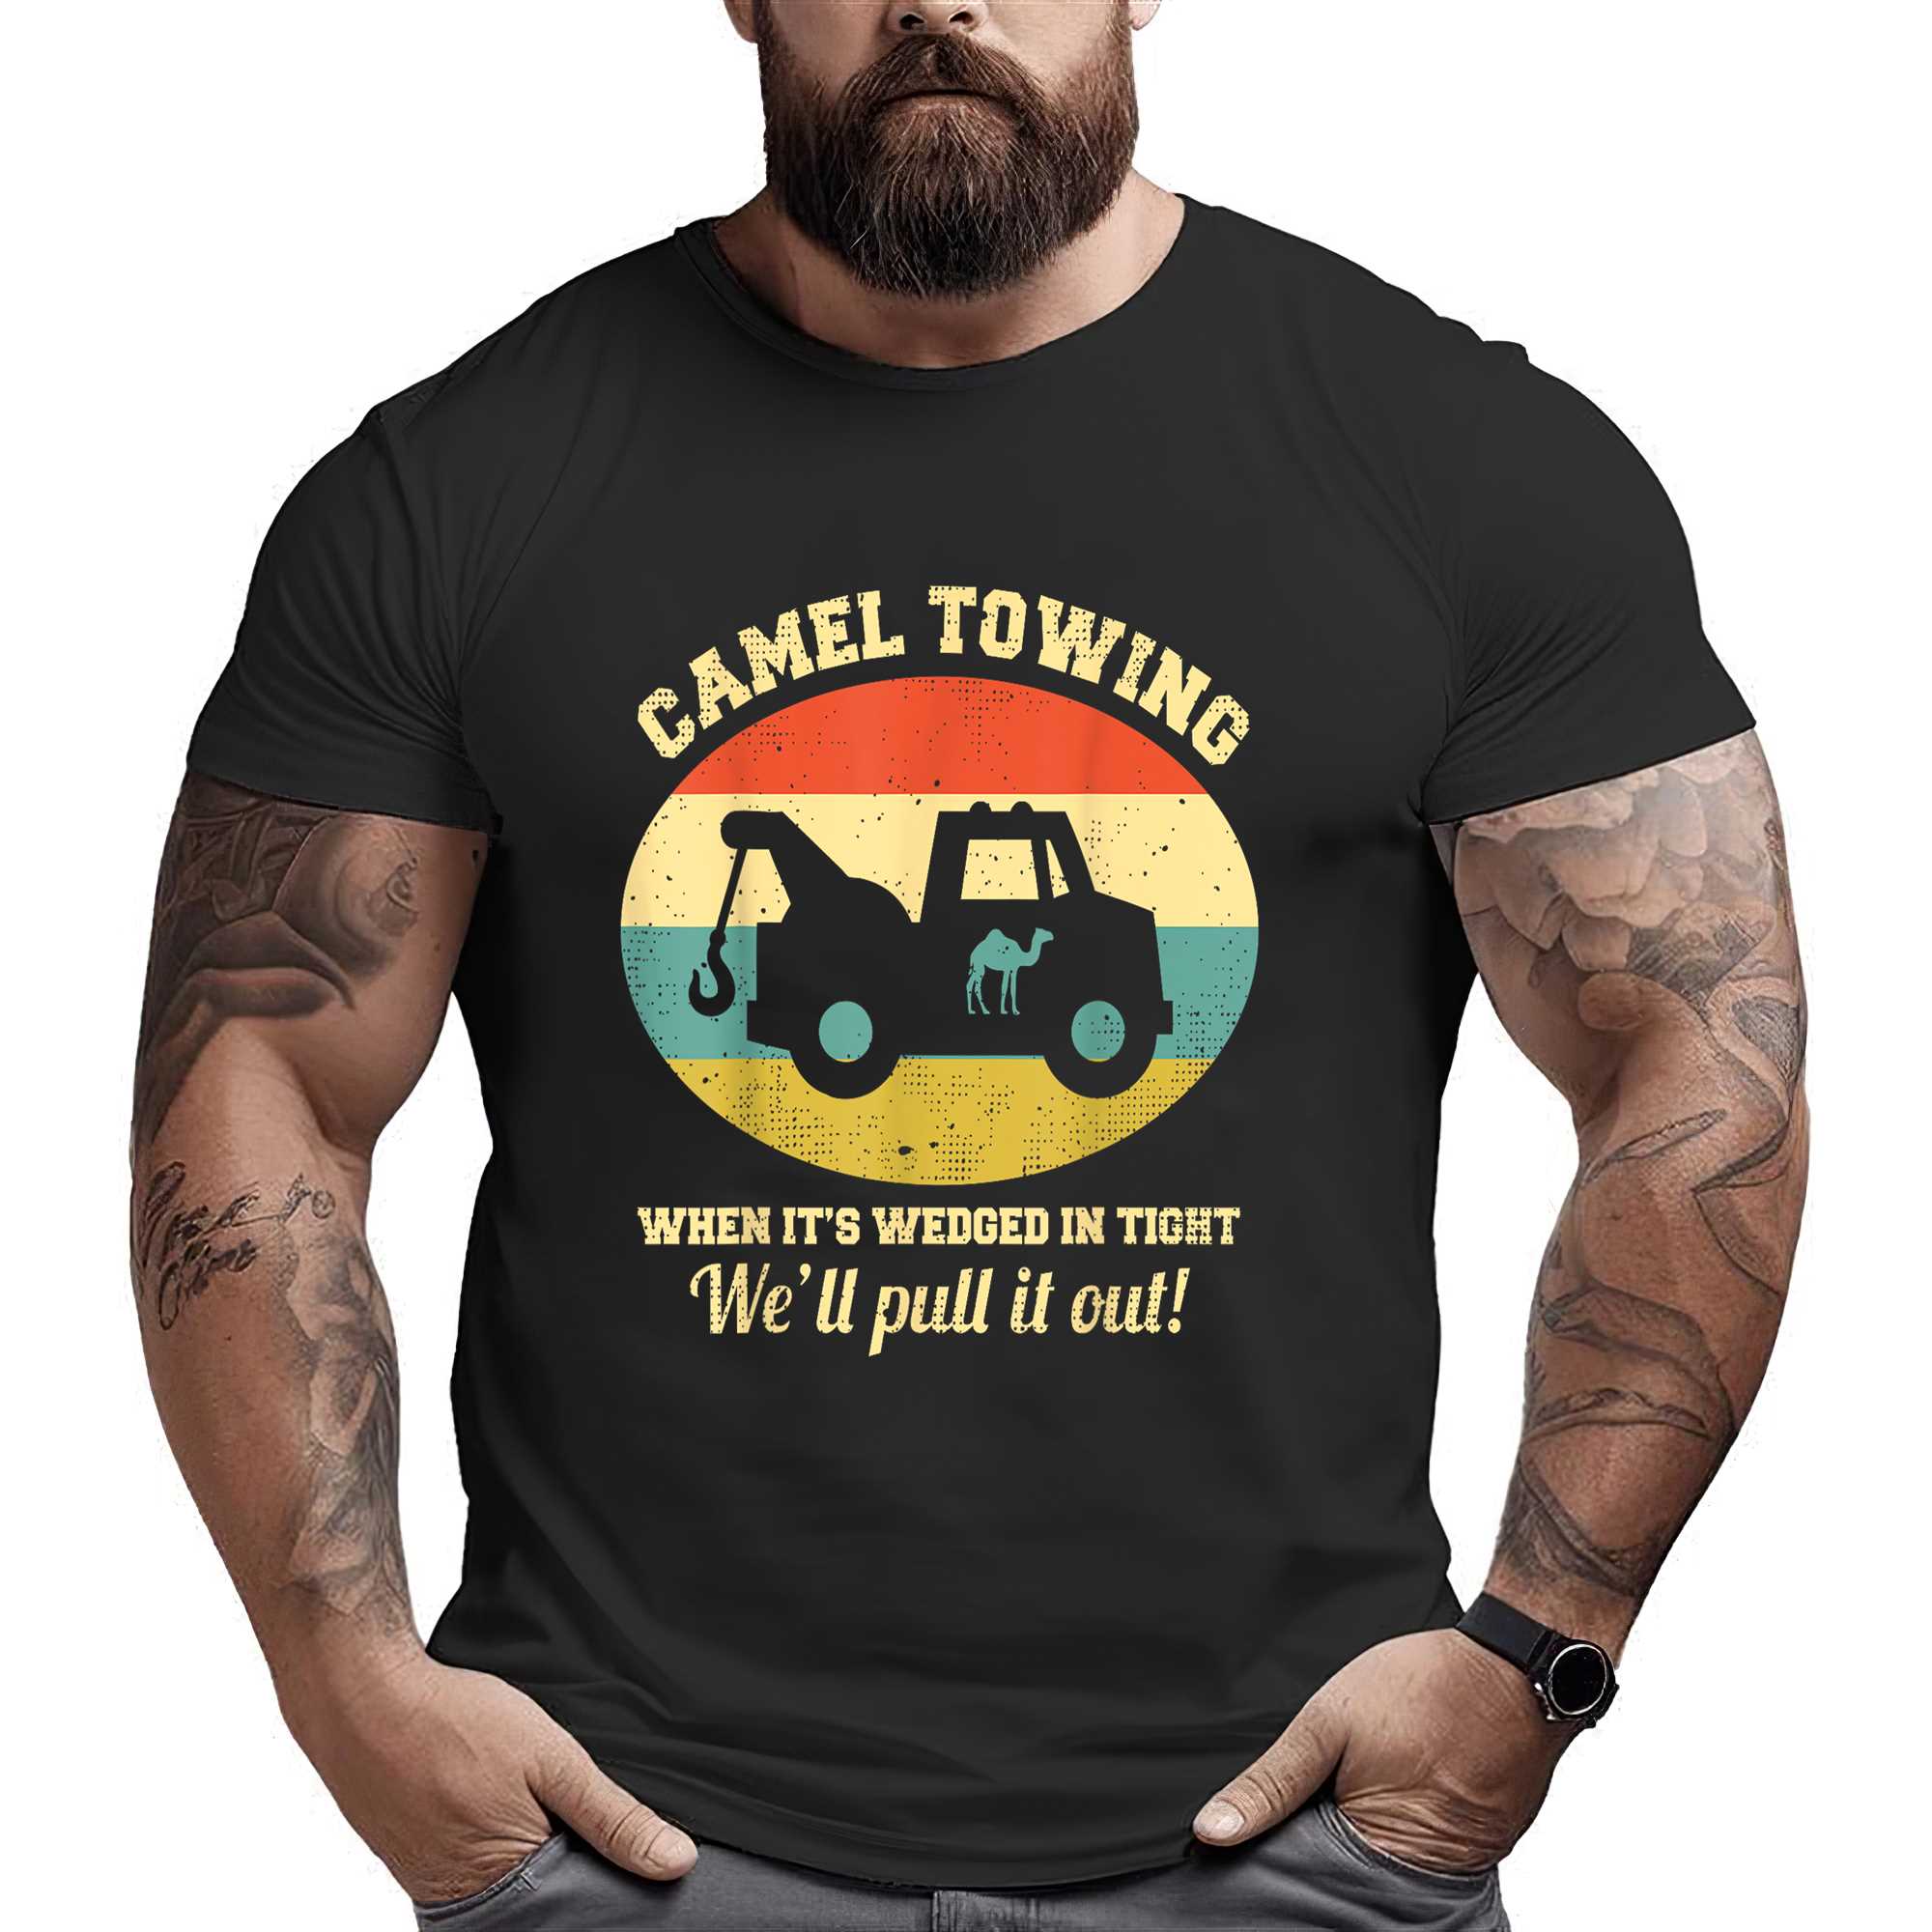 Camel Towing Retro Adult Humor Saying Funny Halloween Gift T-shirt